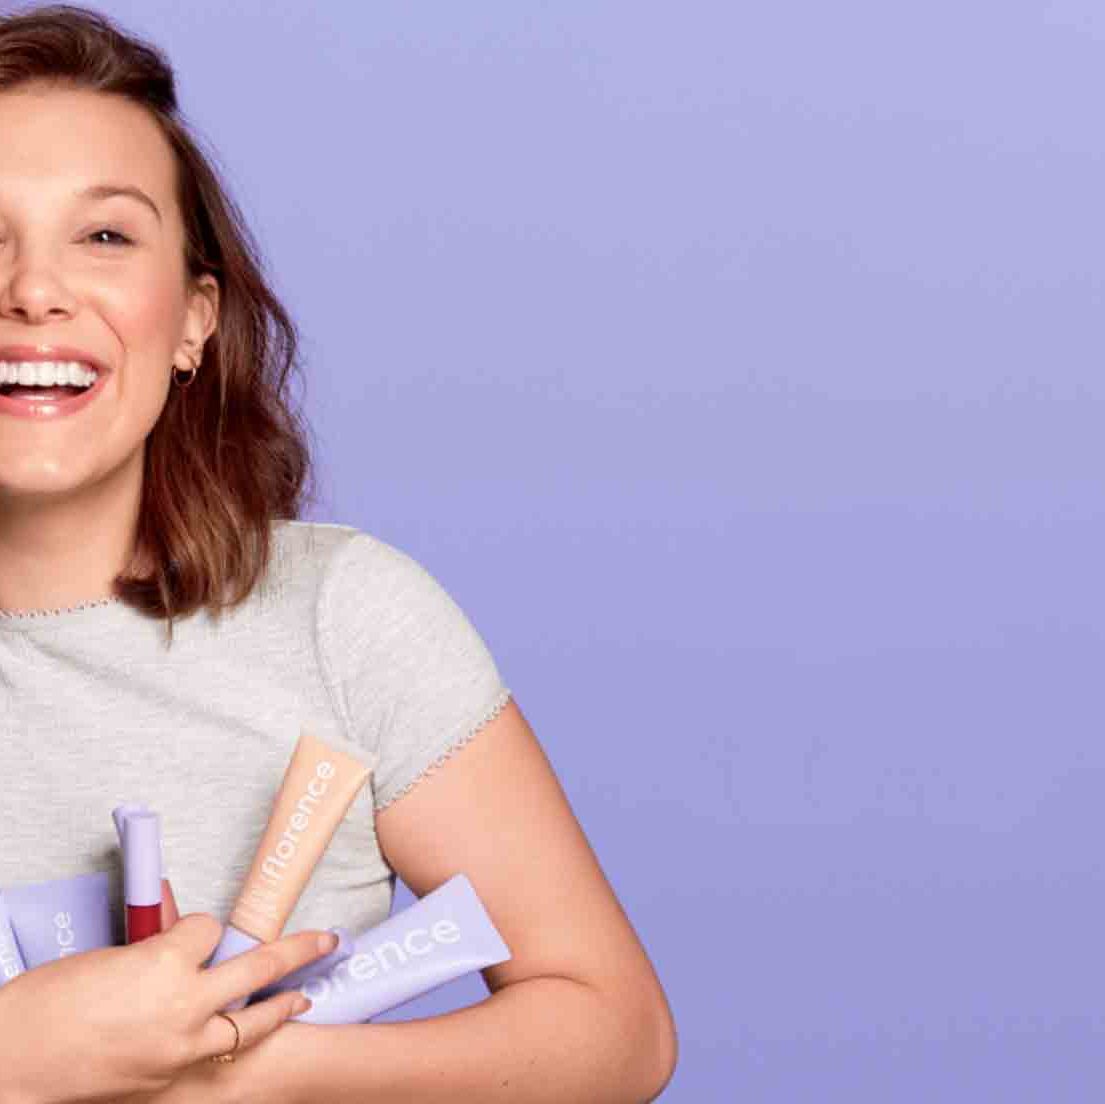 Millie Bobby Brown Is Her Own Beauty Brand